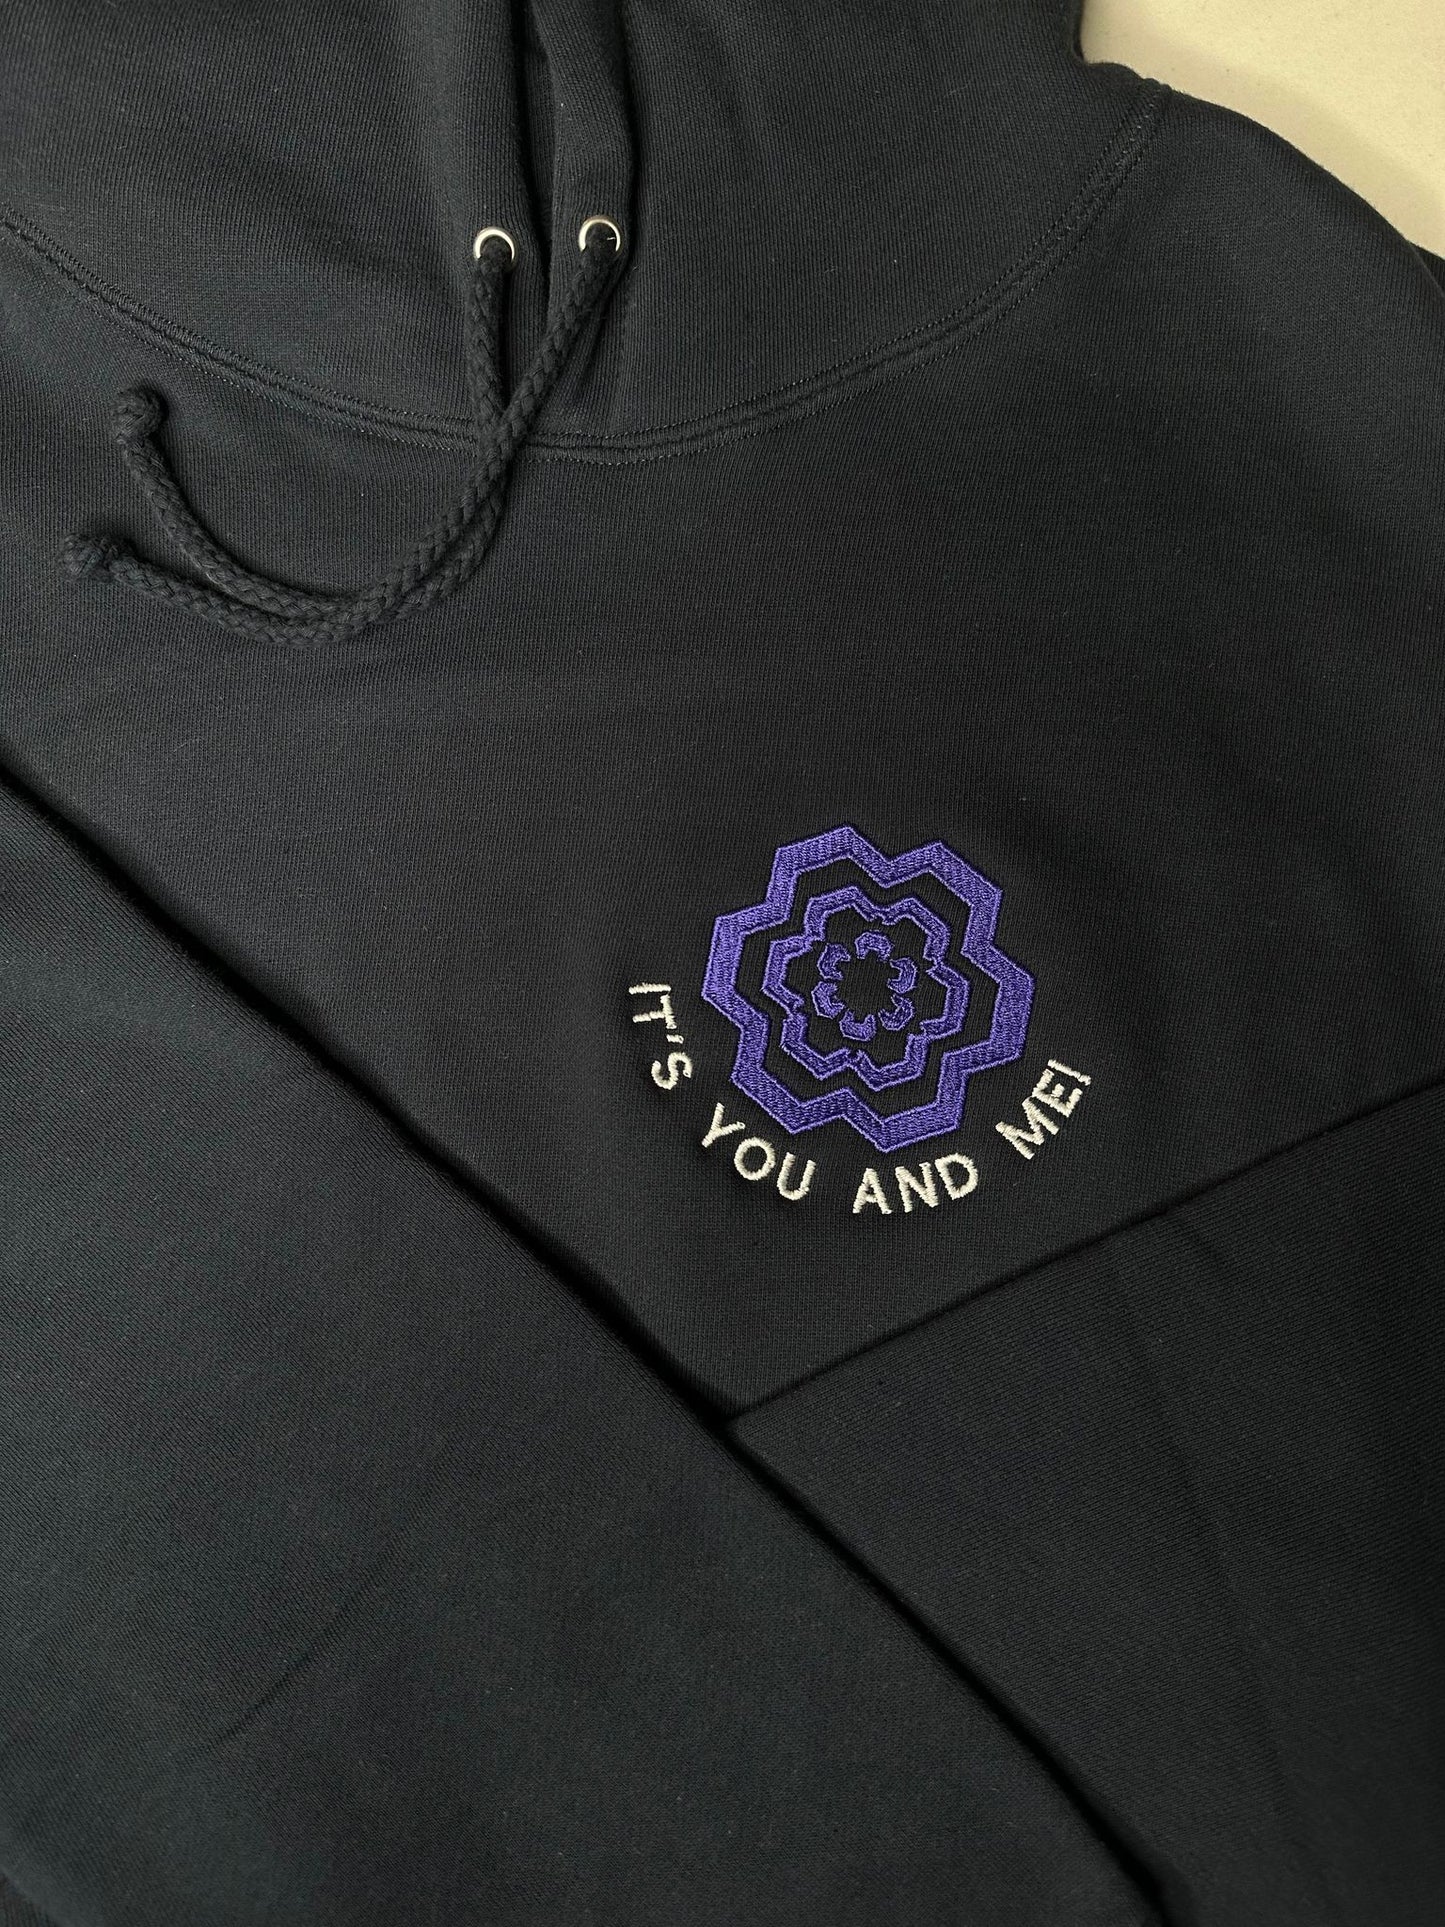 "It's You And Me!" Heavyweight hoodie